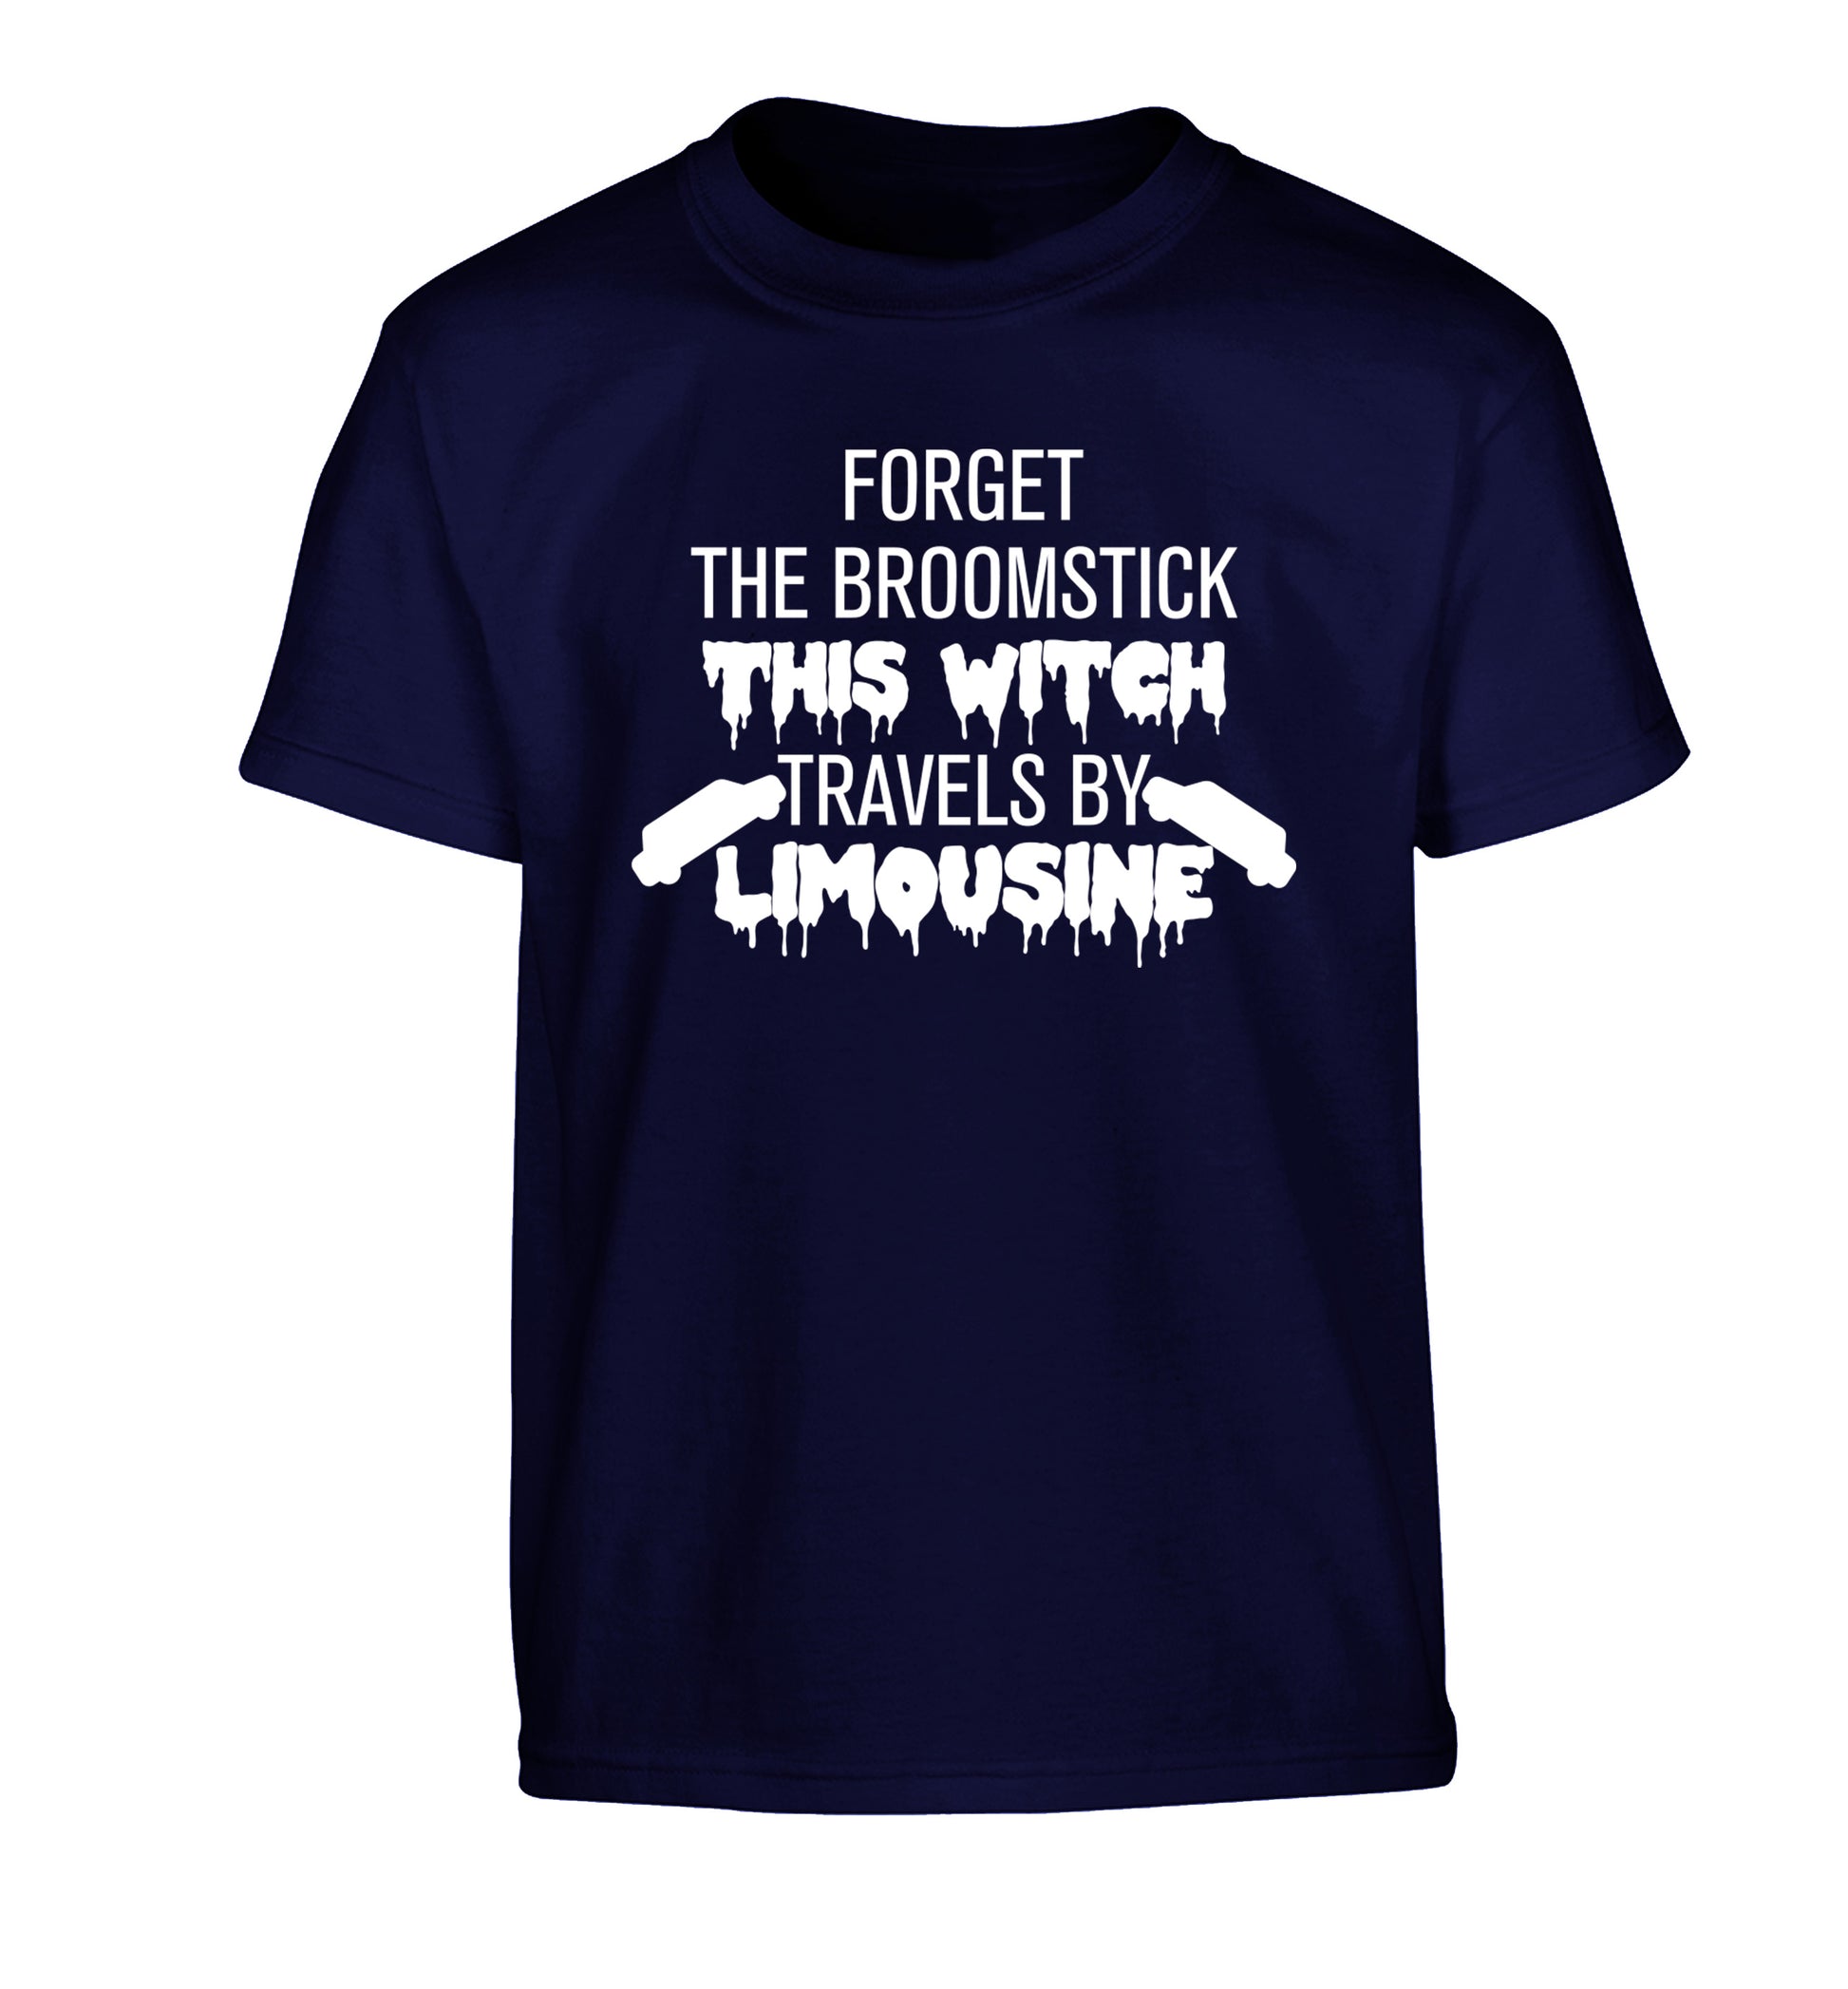 Forget the broomstick this witch travels by limousine Children's navy Tshirt 12-14 Years